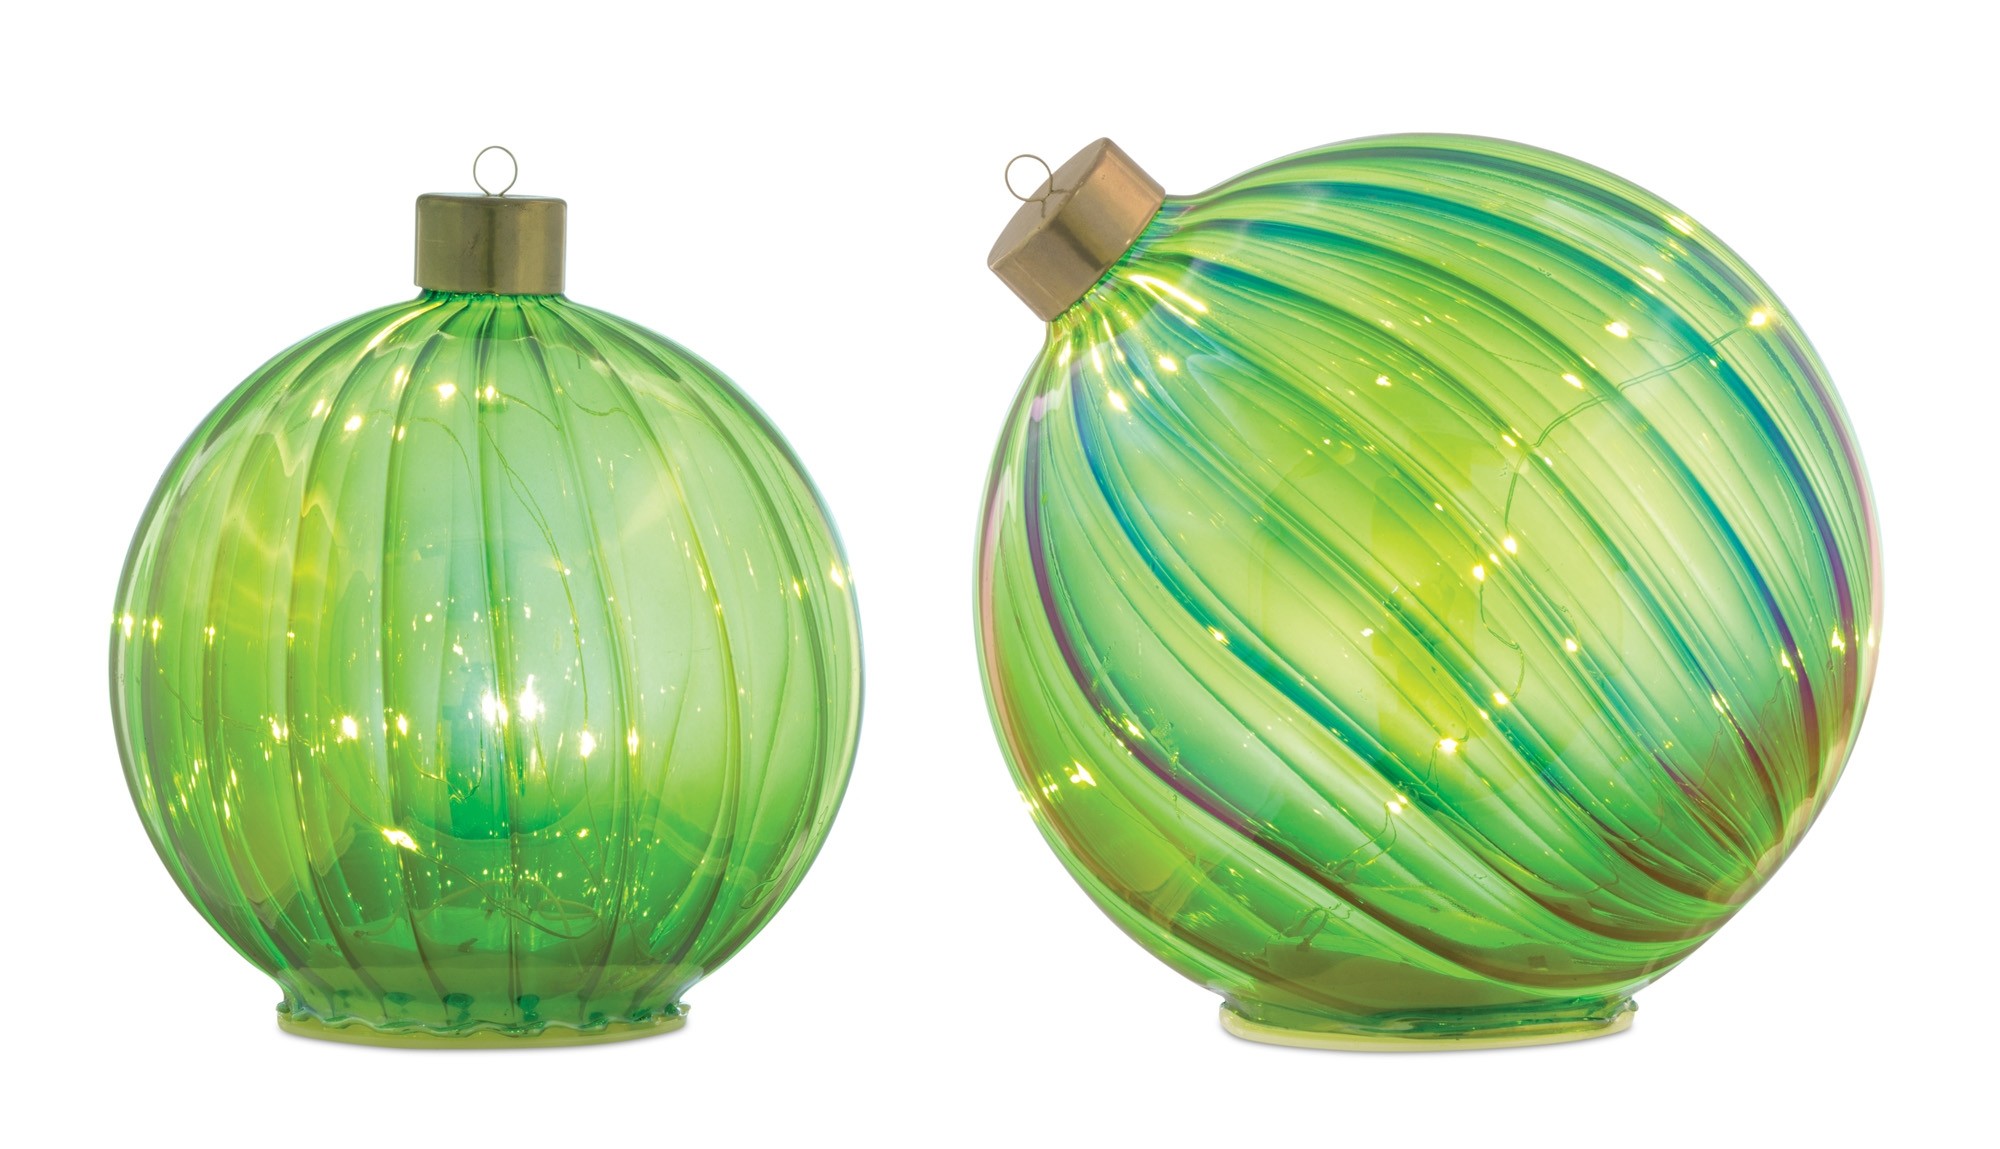 Tabletop Ornament (Set of 2) 5.75"W x 7"H, 7"W x 7"H Glass 3 AA Batteries, Not Included